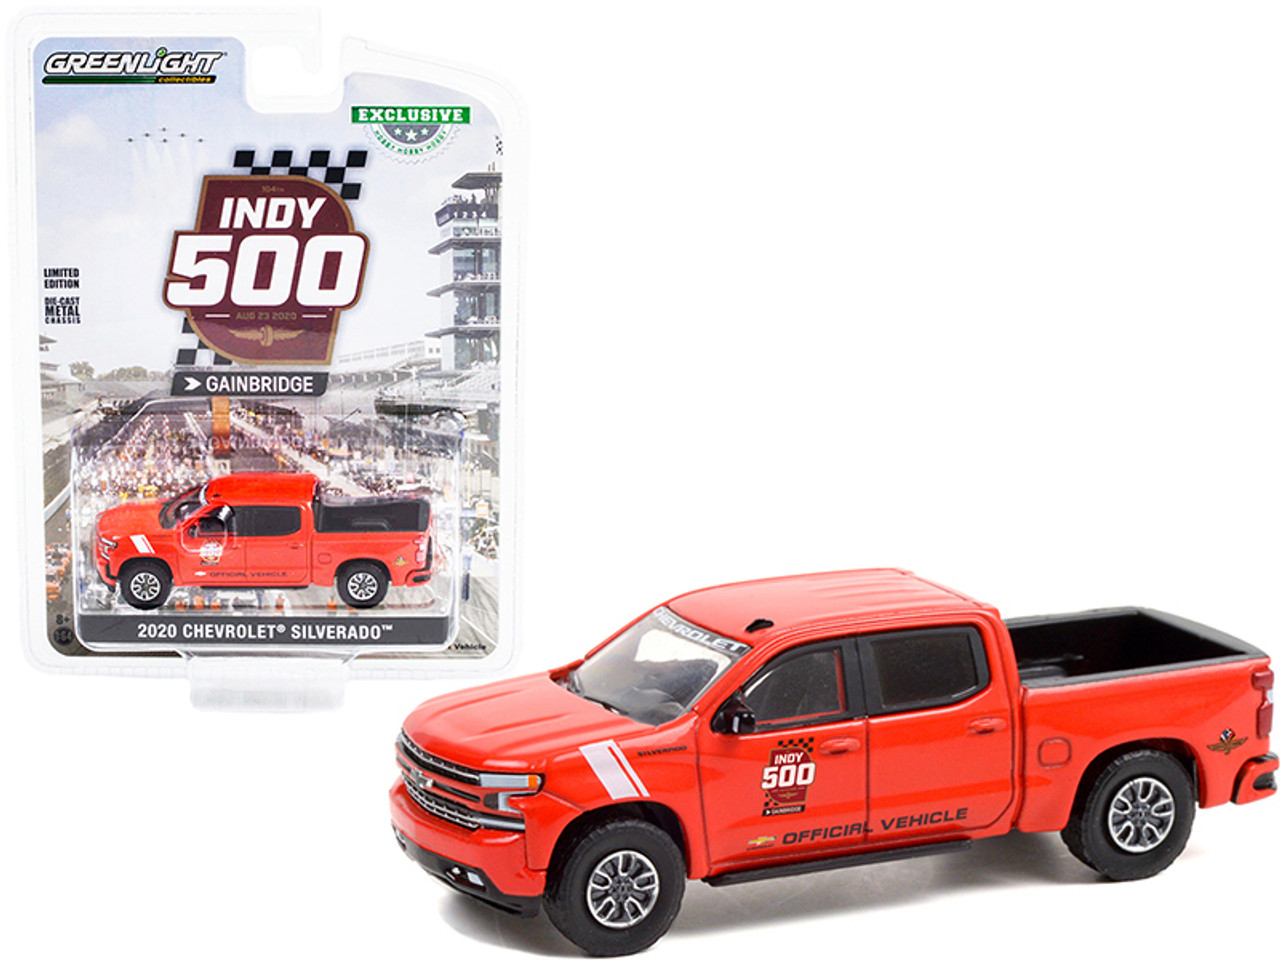 2020 Chevrolet Silverado Pickup Truck Official Vehicle "104th Running of the Indianapolis 500" (2020) "Hobby Exclusive" 1/64 Diecast Model Car by Greenlight